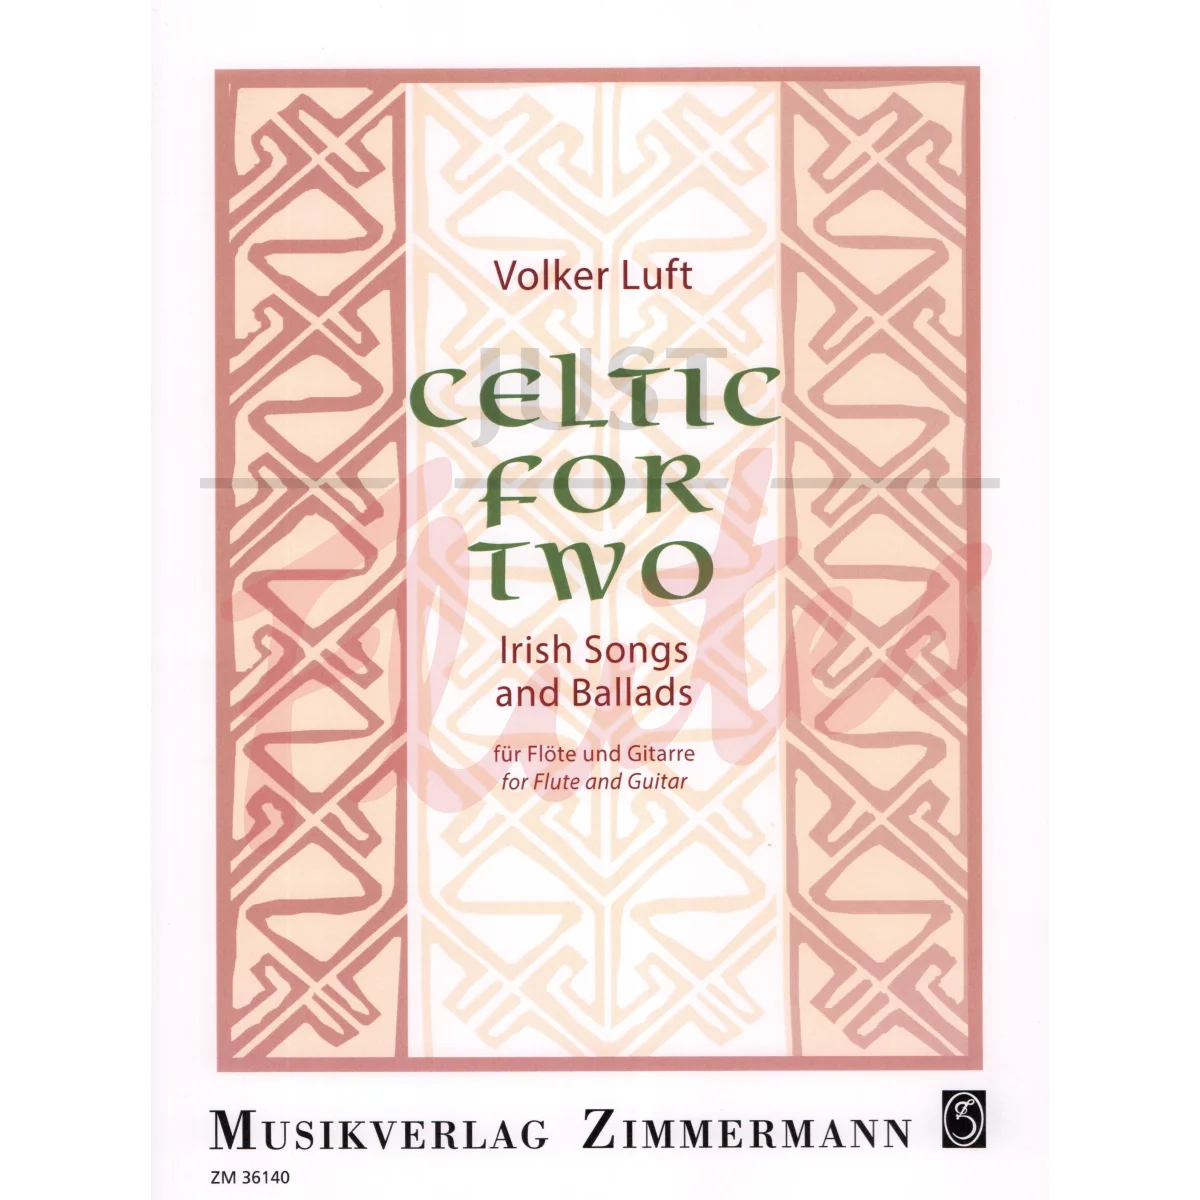 Celtic for Two - Irish Songs and Ballads for Flute and Guitar